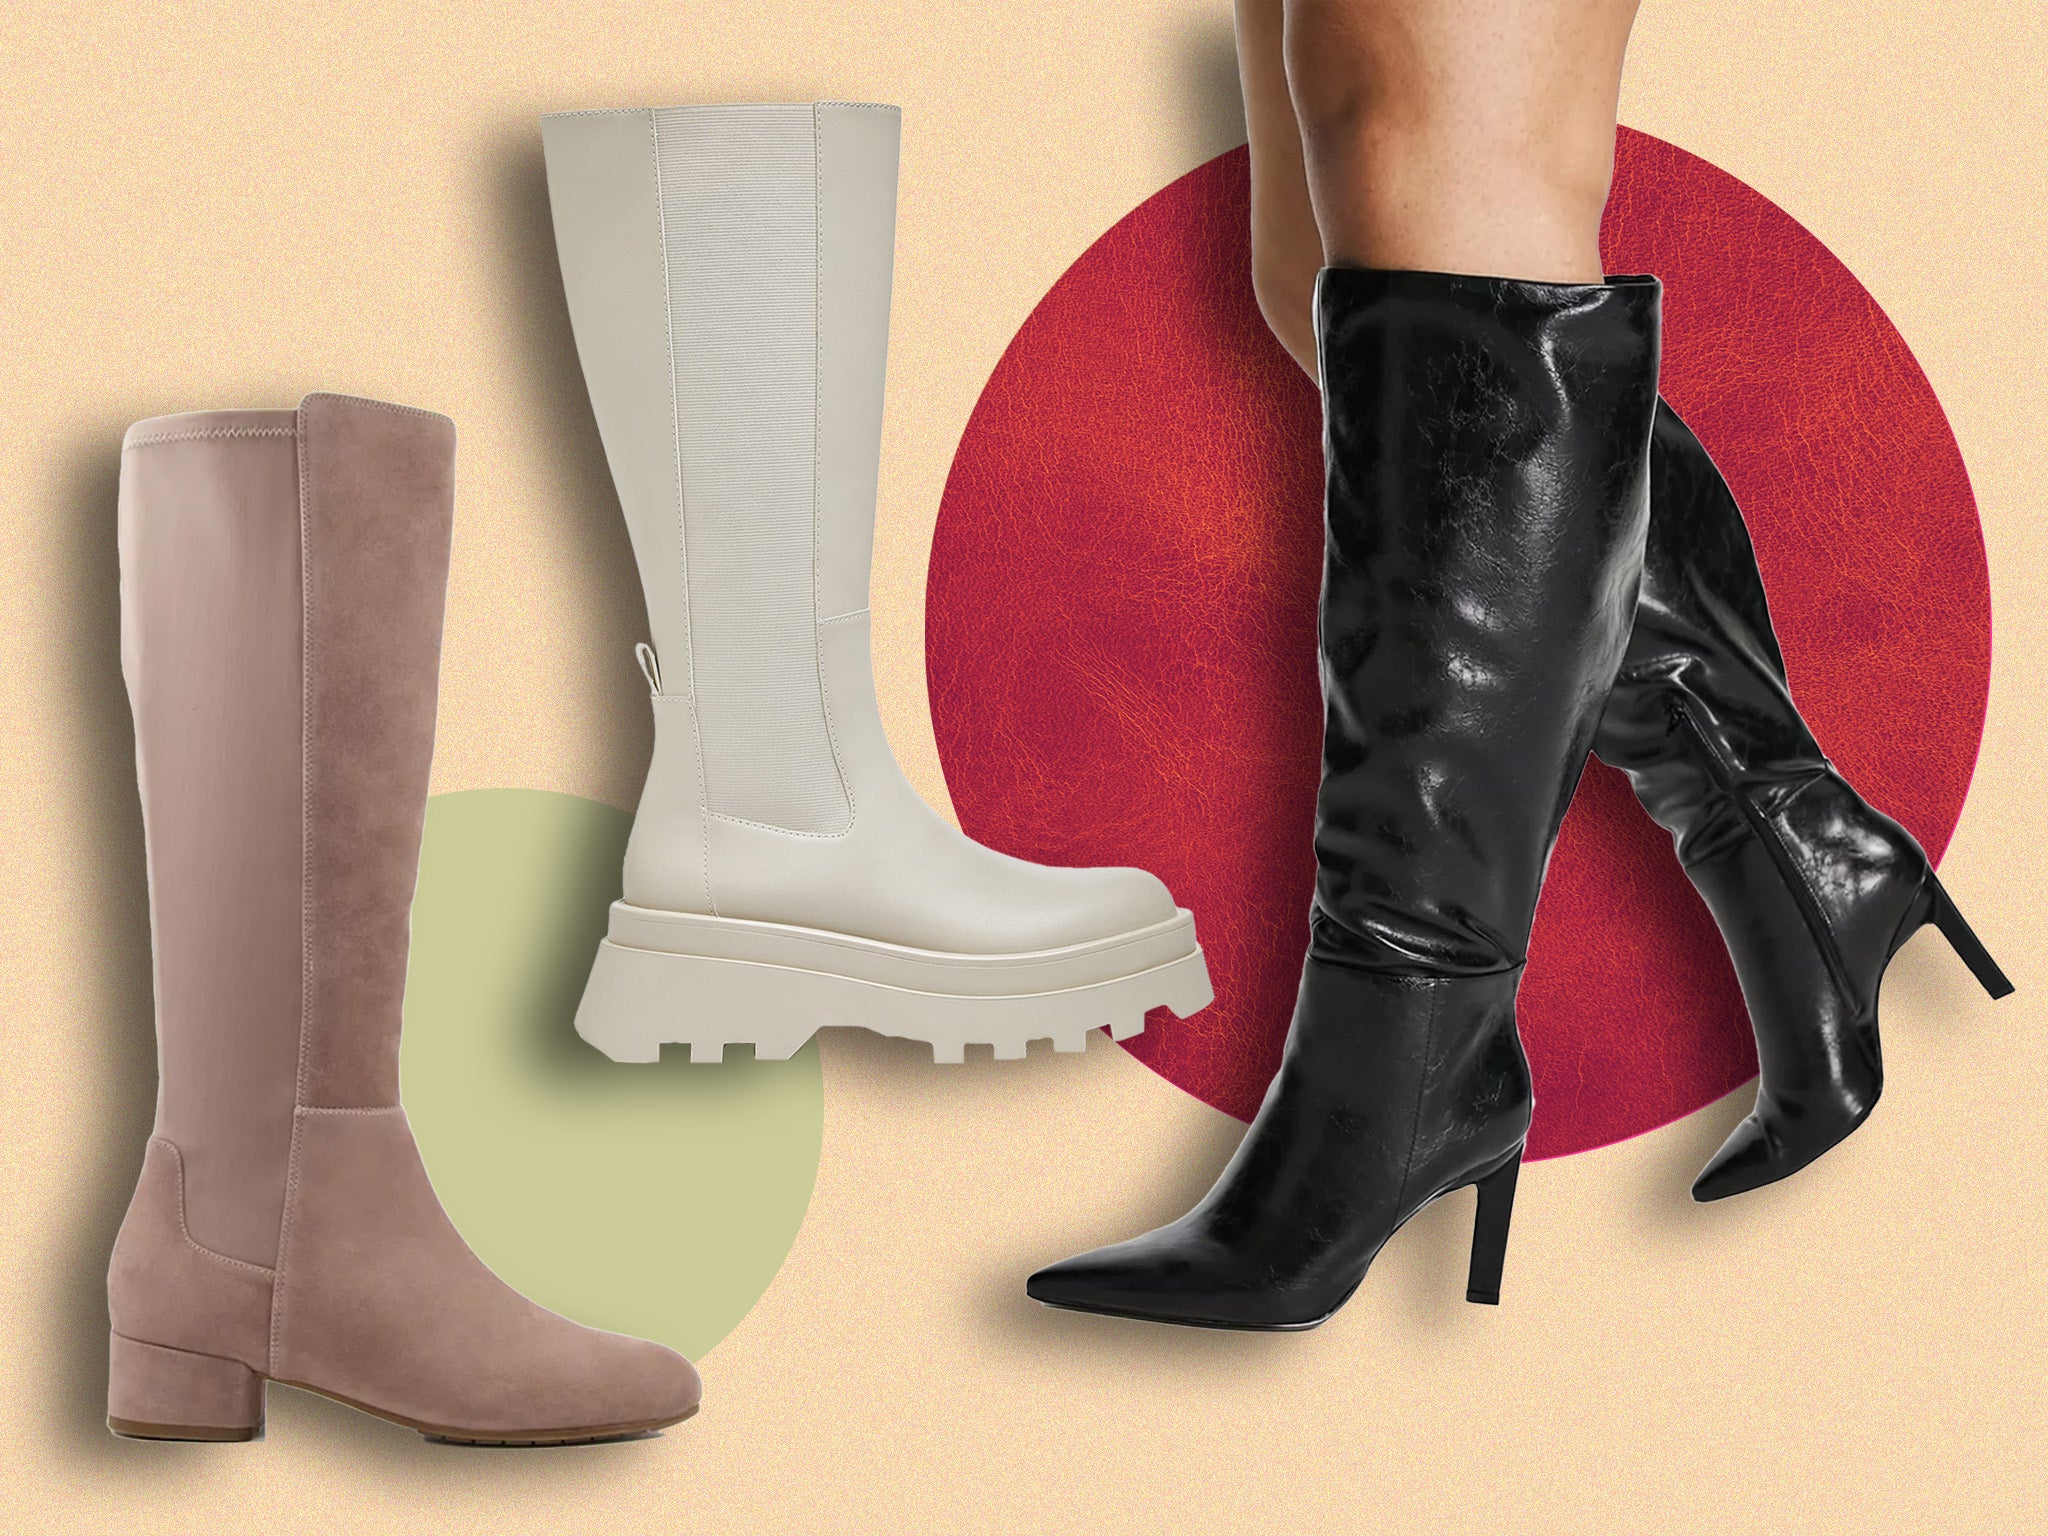 Best Wide Calf Boots 2022 Knee High Styles For Women The Independent